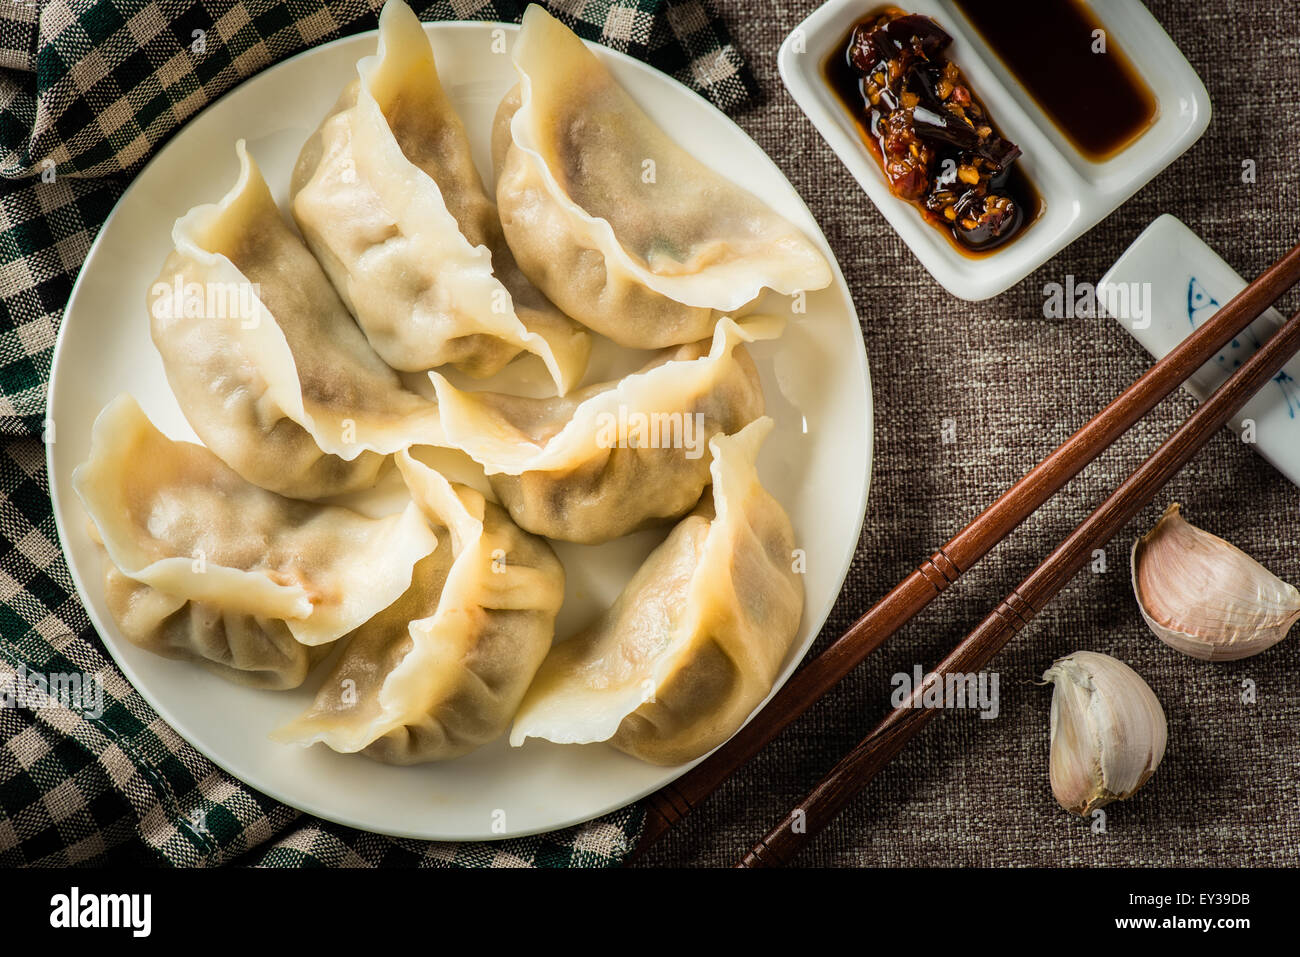 Boiled Homemade Dumplings Served in Plate with Dipping Sauce Stock Photo